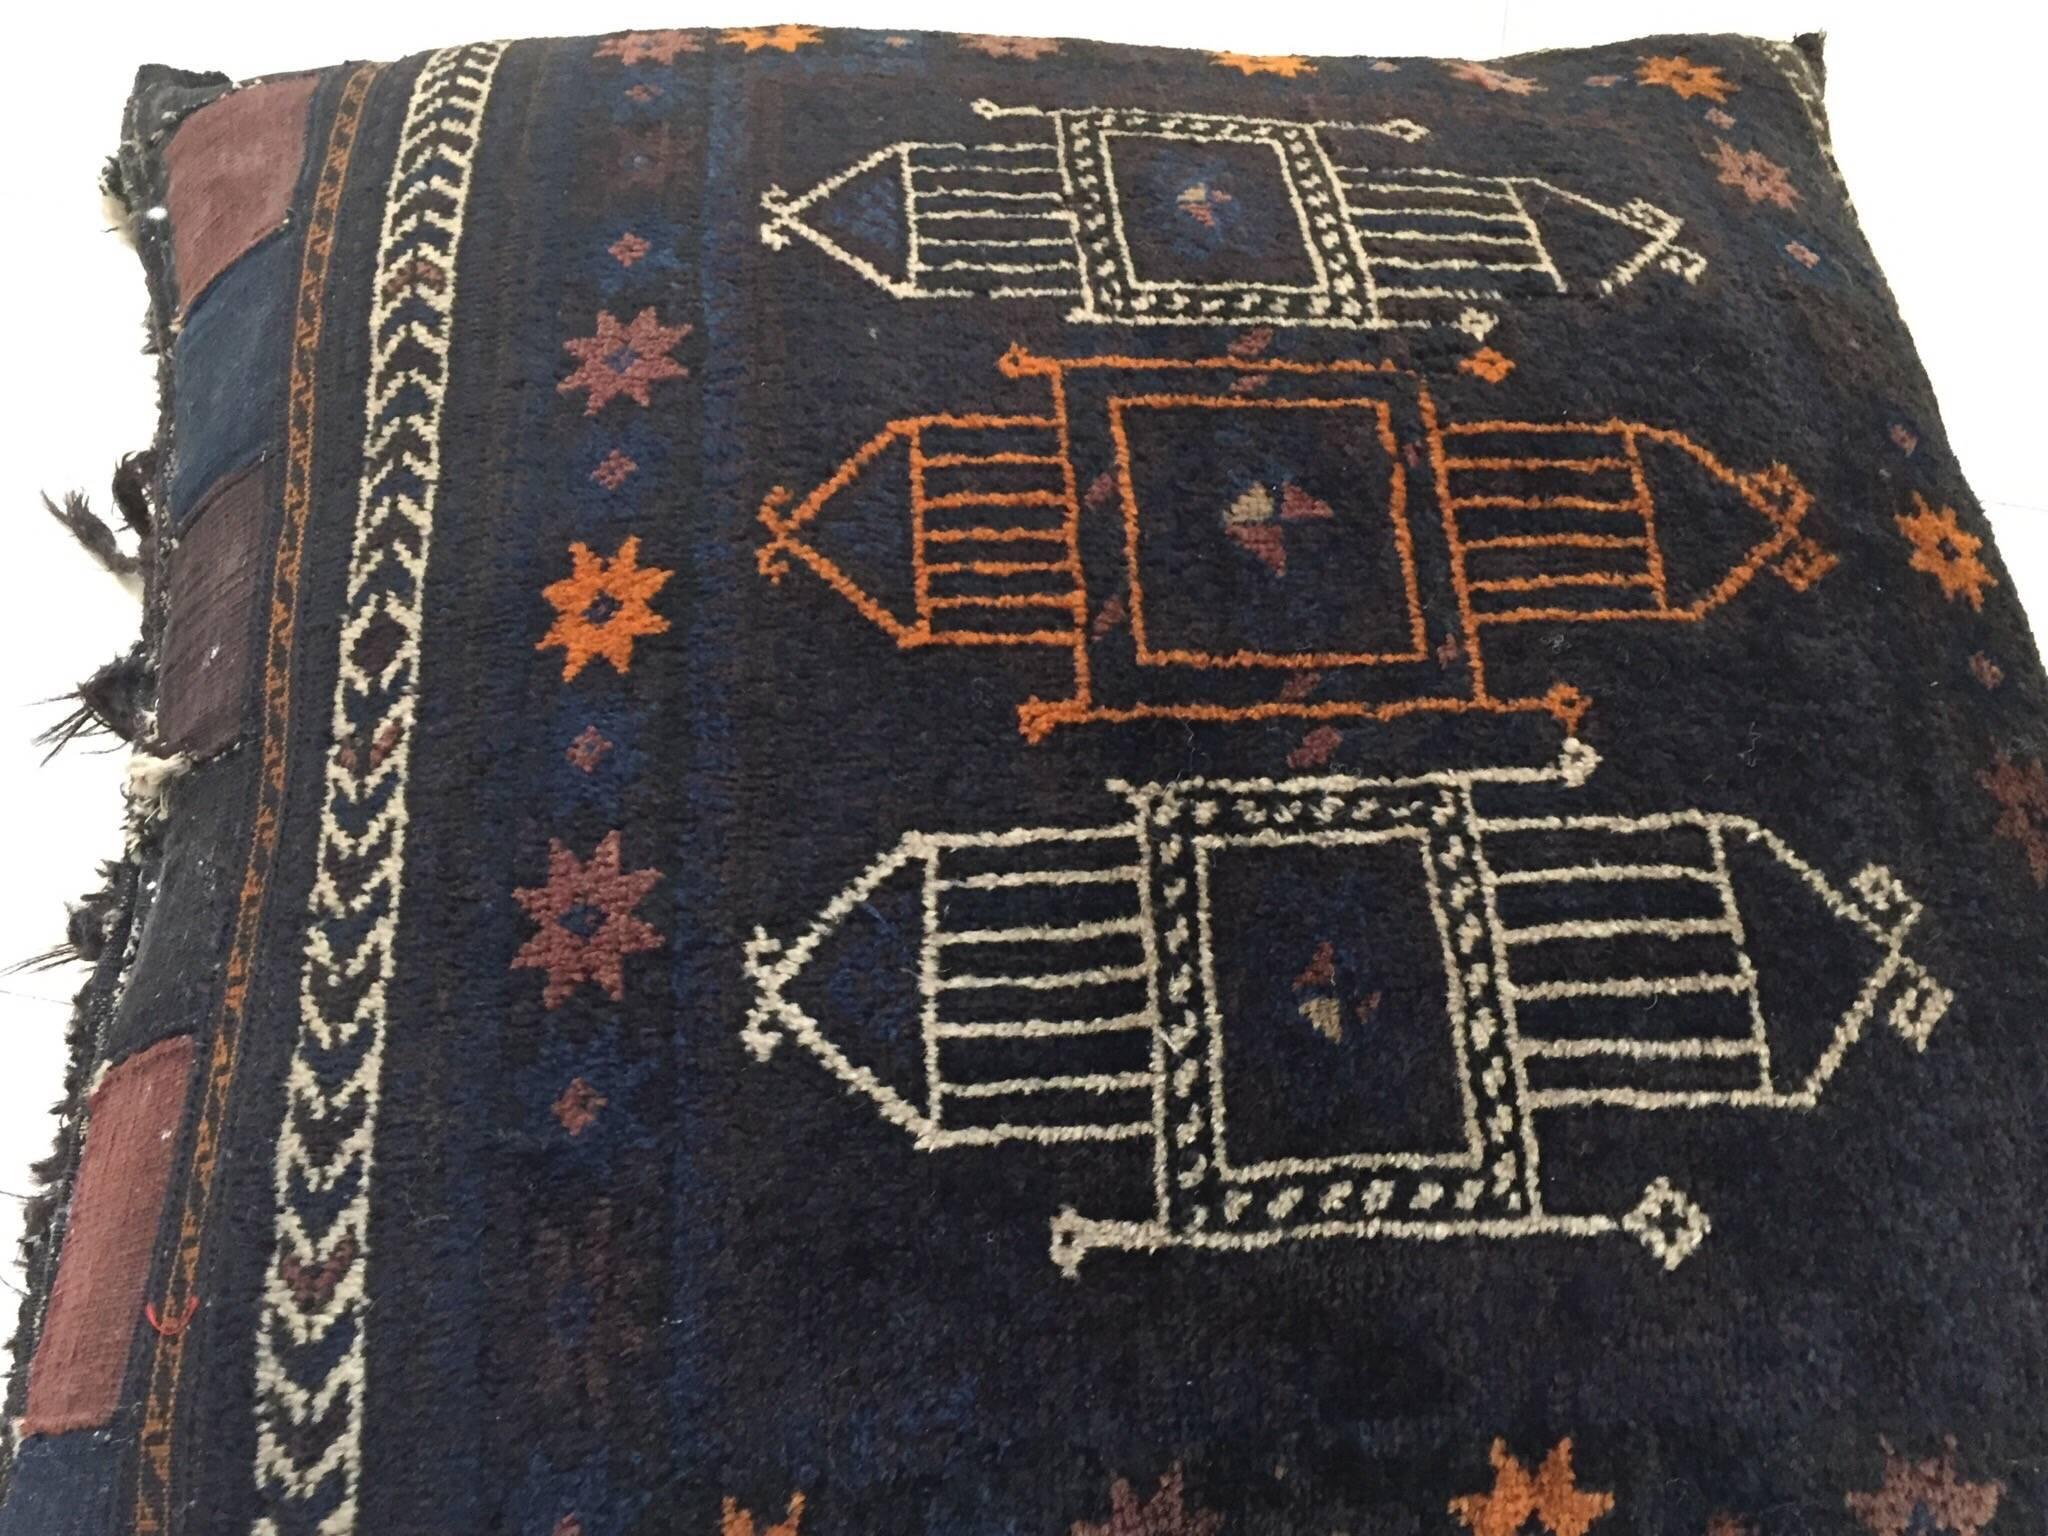 Handmade antique collectible Afghan Baluch camel saddle grain tribal bag,
circa 1880s, this large tribal camel grain bag was filled and made into a large floor pillow.
This tribal textile top rug has beautiful deep blue and black shades with soft